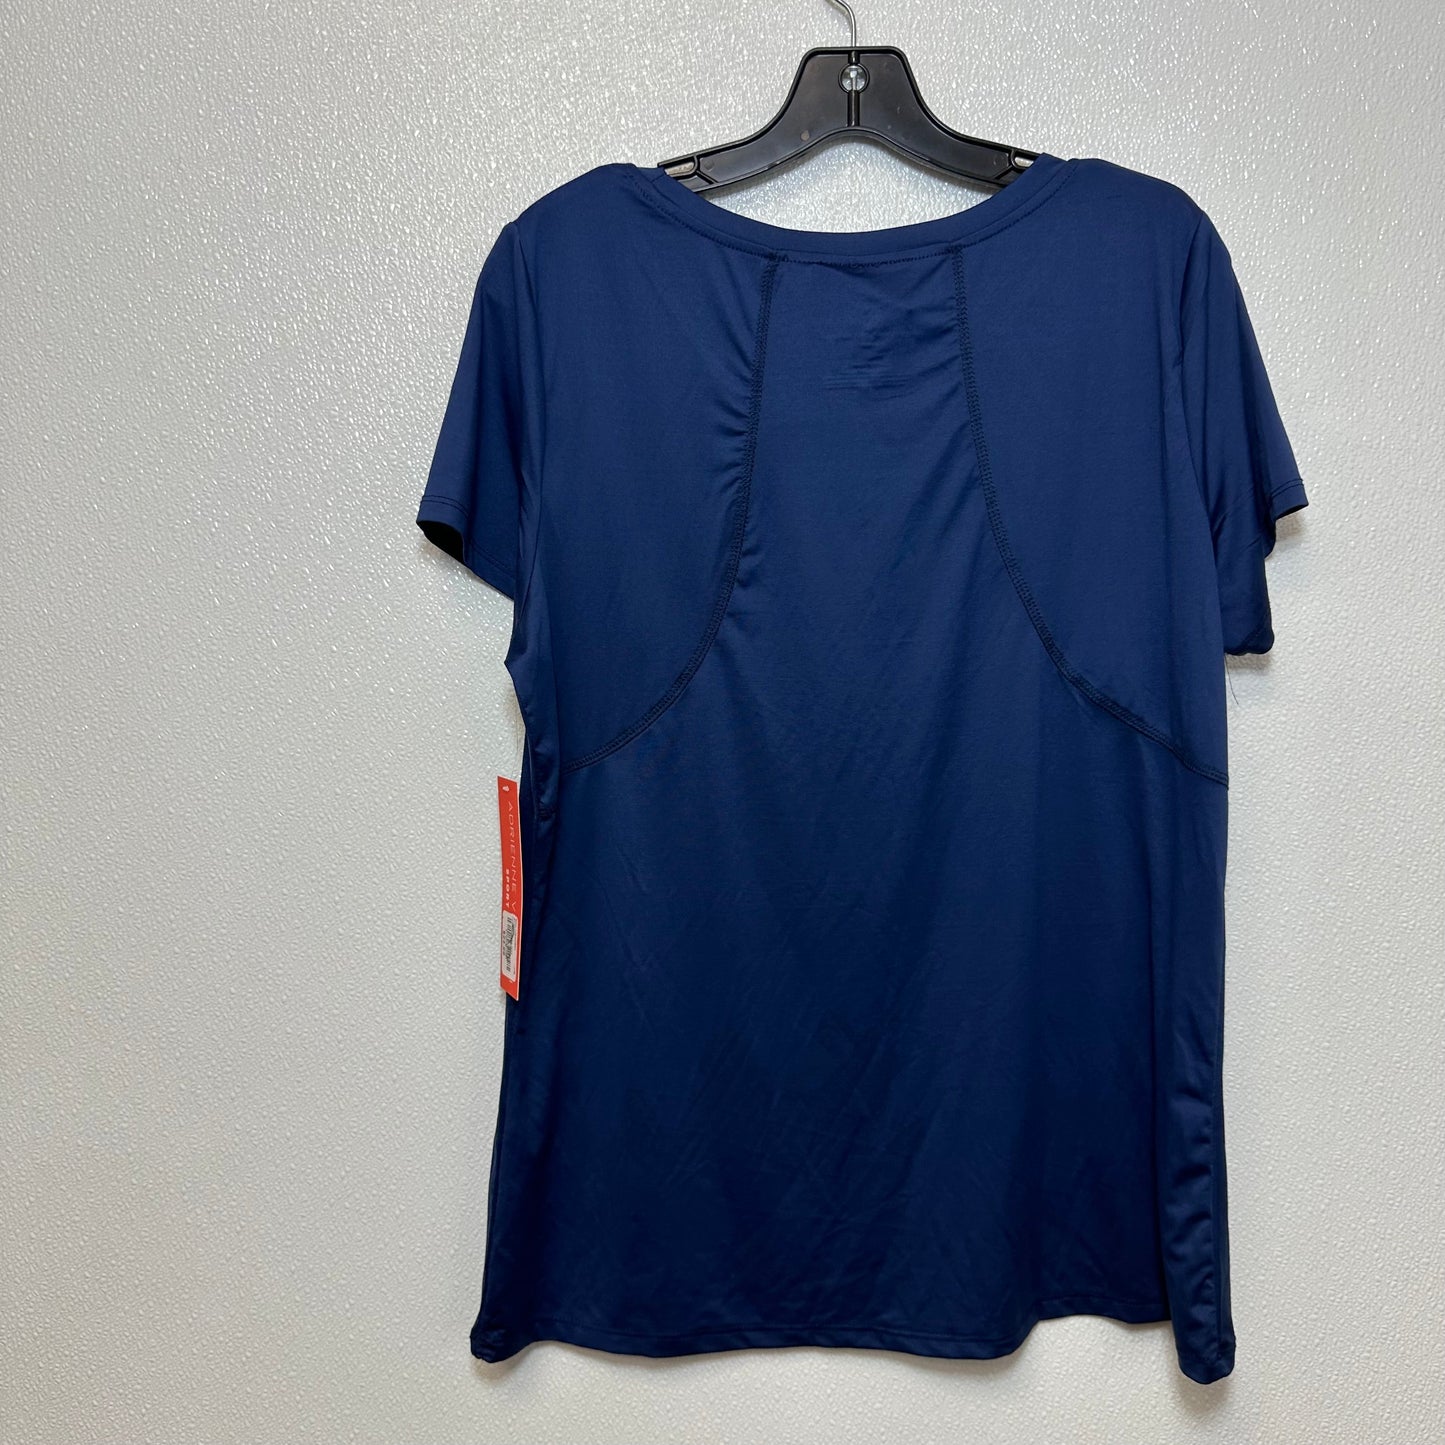 Athletic Top Short Sleeve By Adrienne Vittadini  Size: L